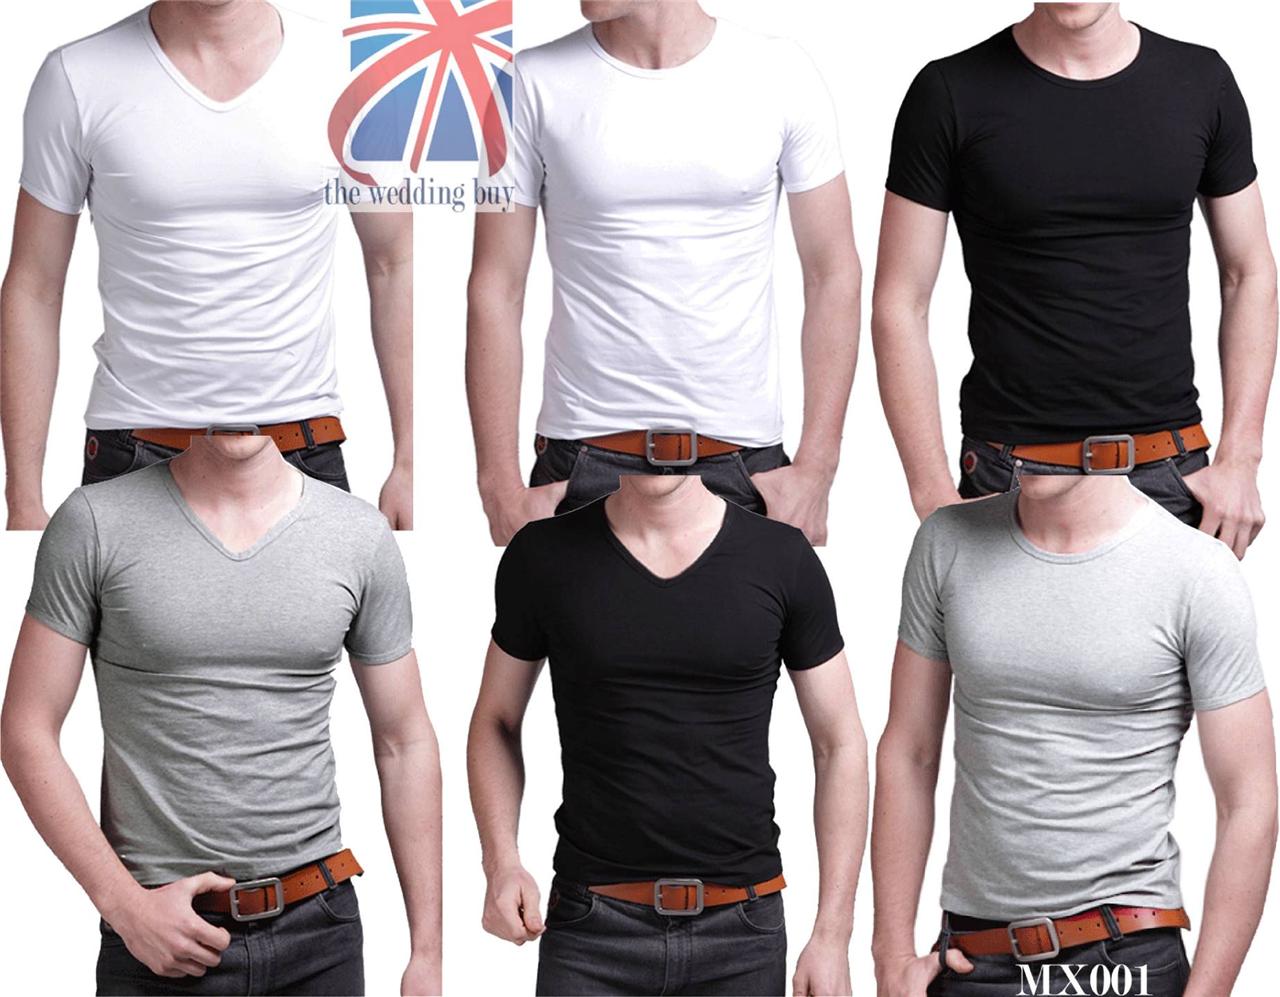 Mens Slim Fit V-neck/ Crew neck T-shirt Short Sleeve Muscle Tee Size S